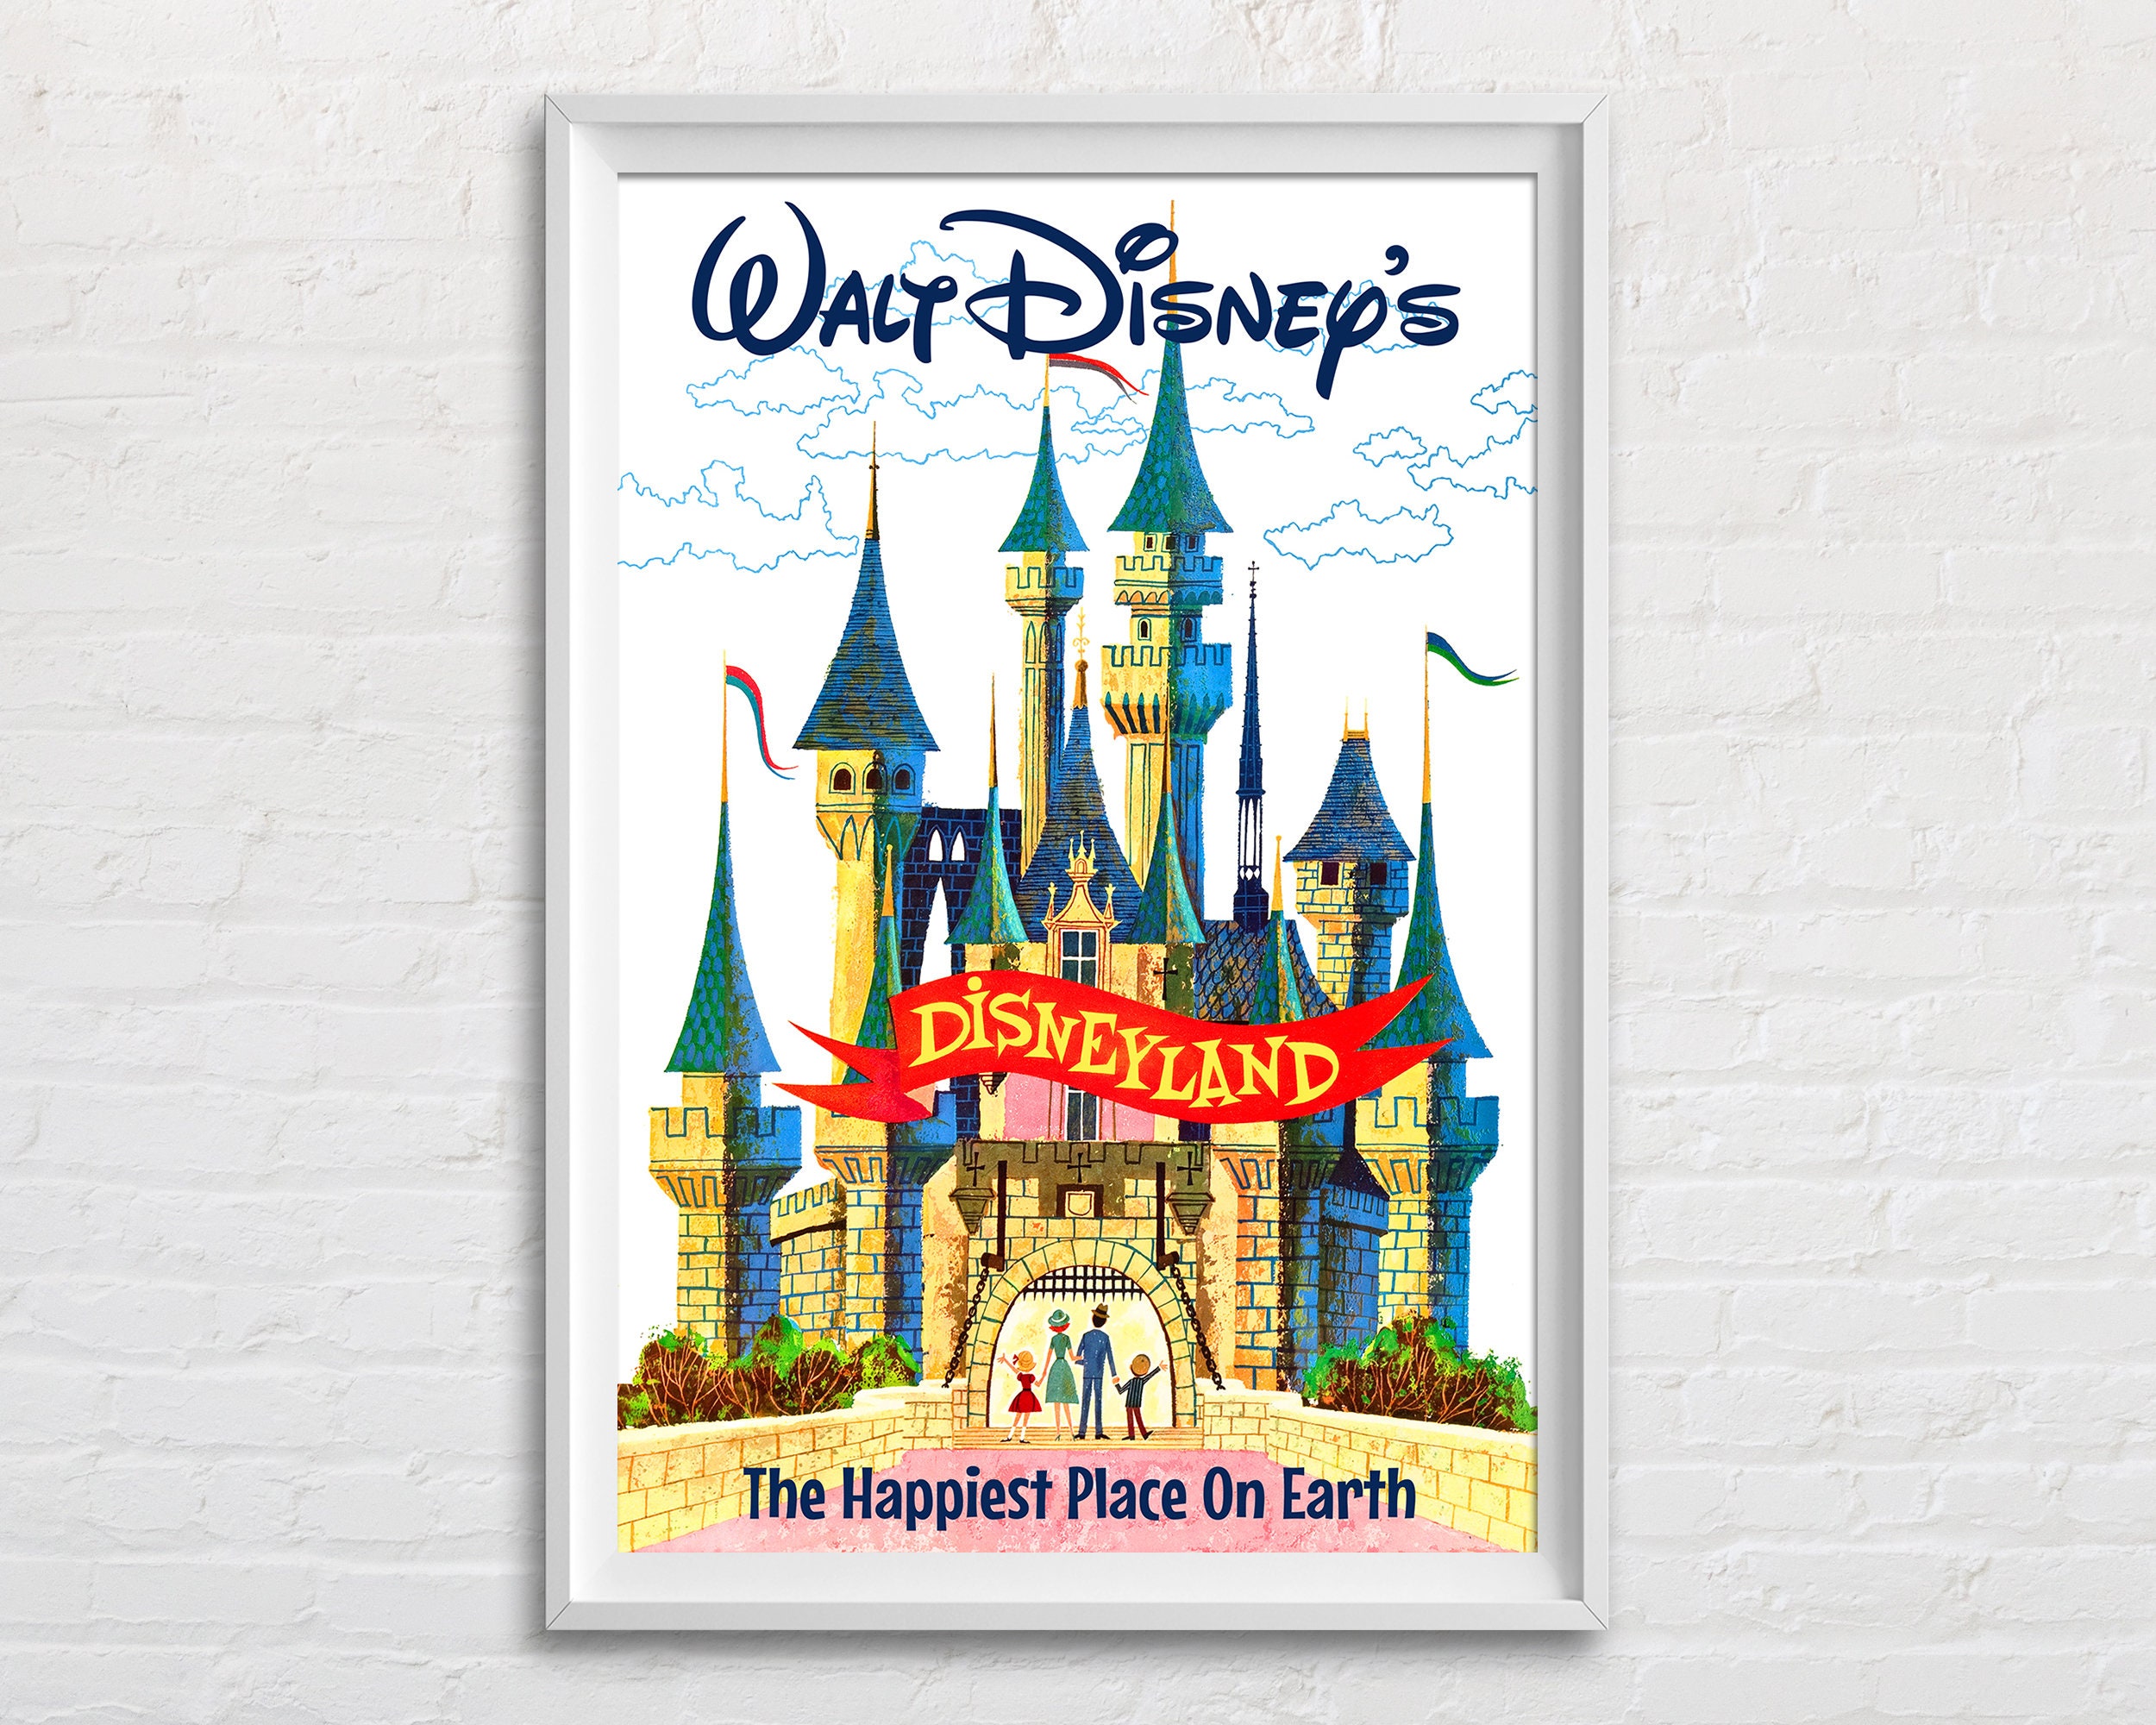 Happiest Place on Earth Pillow Covers, Disney Pillow Covers